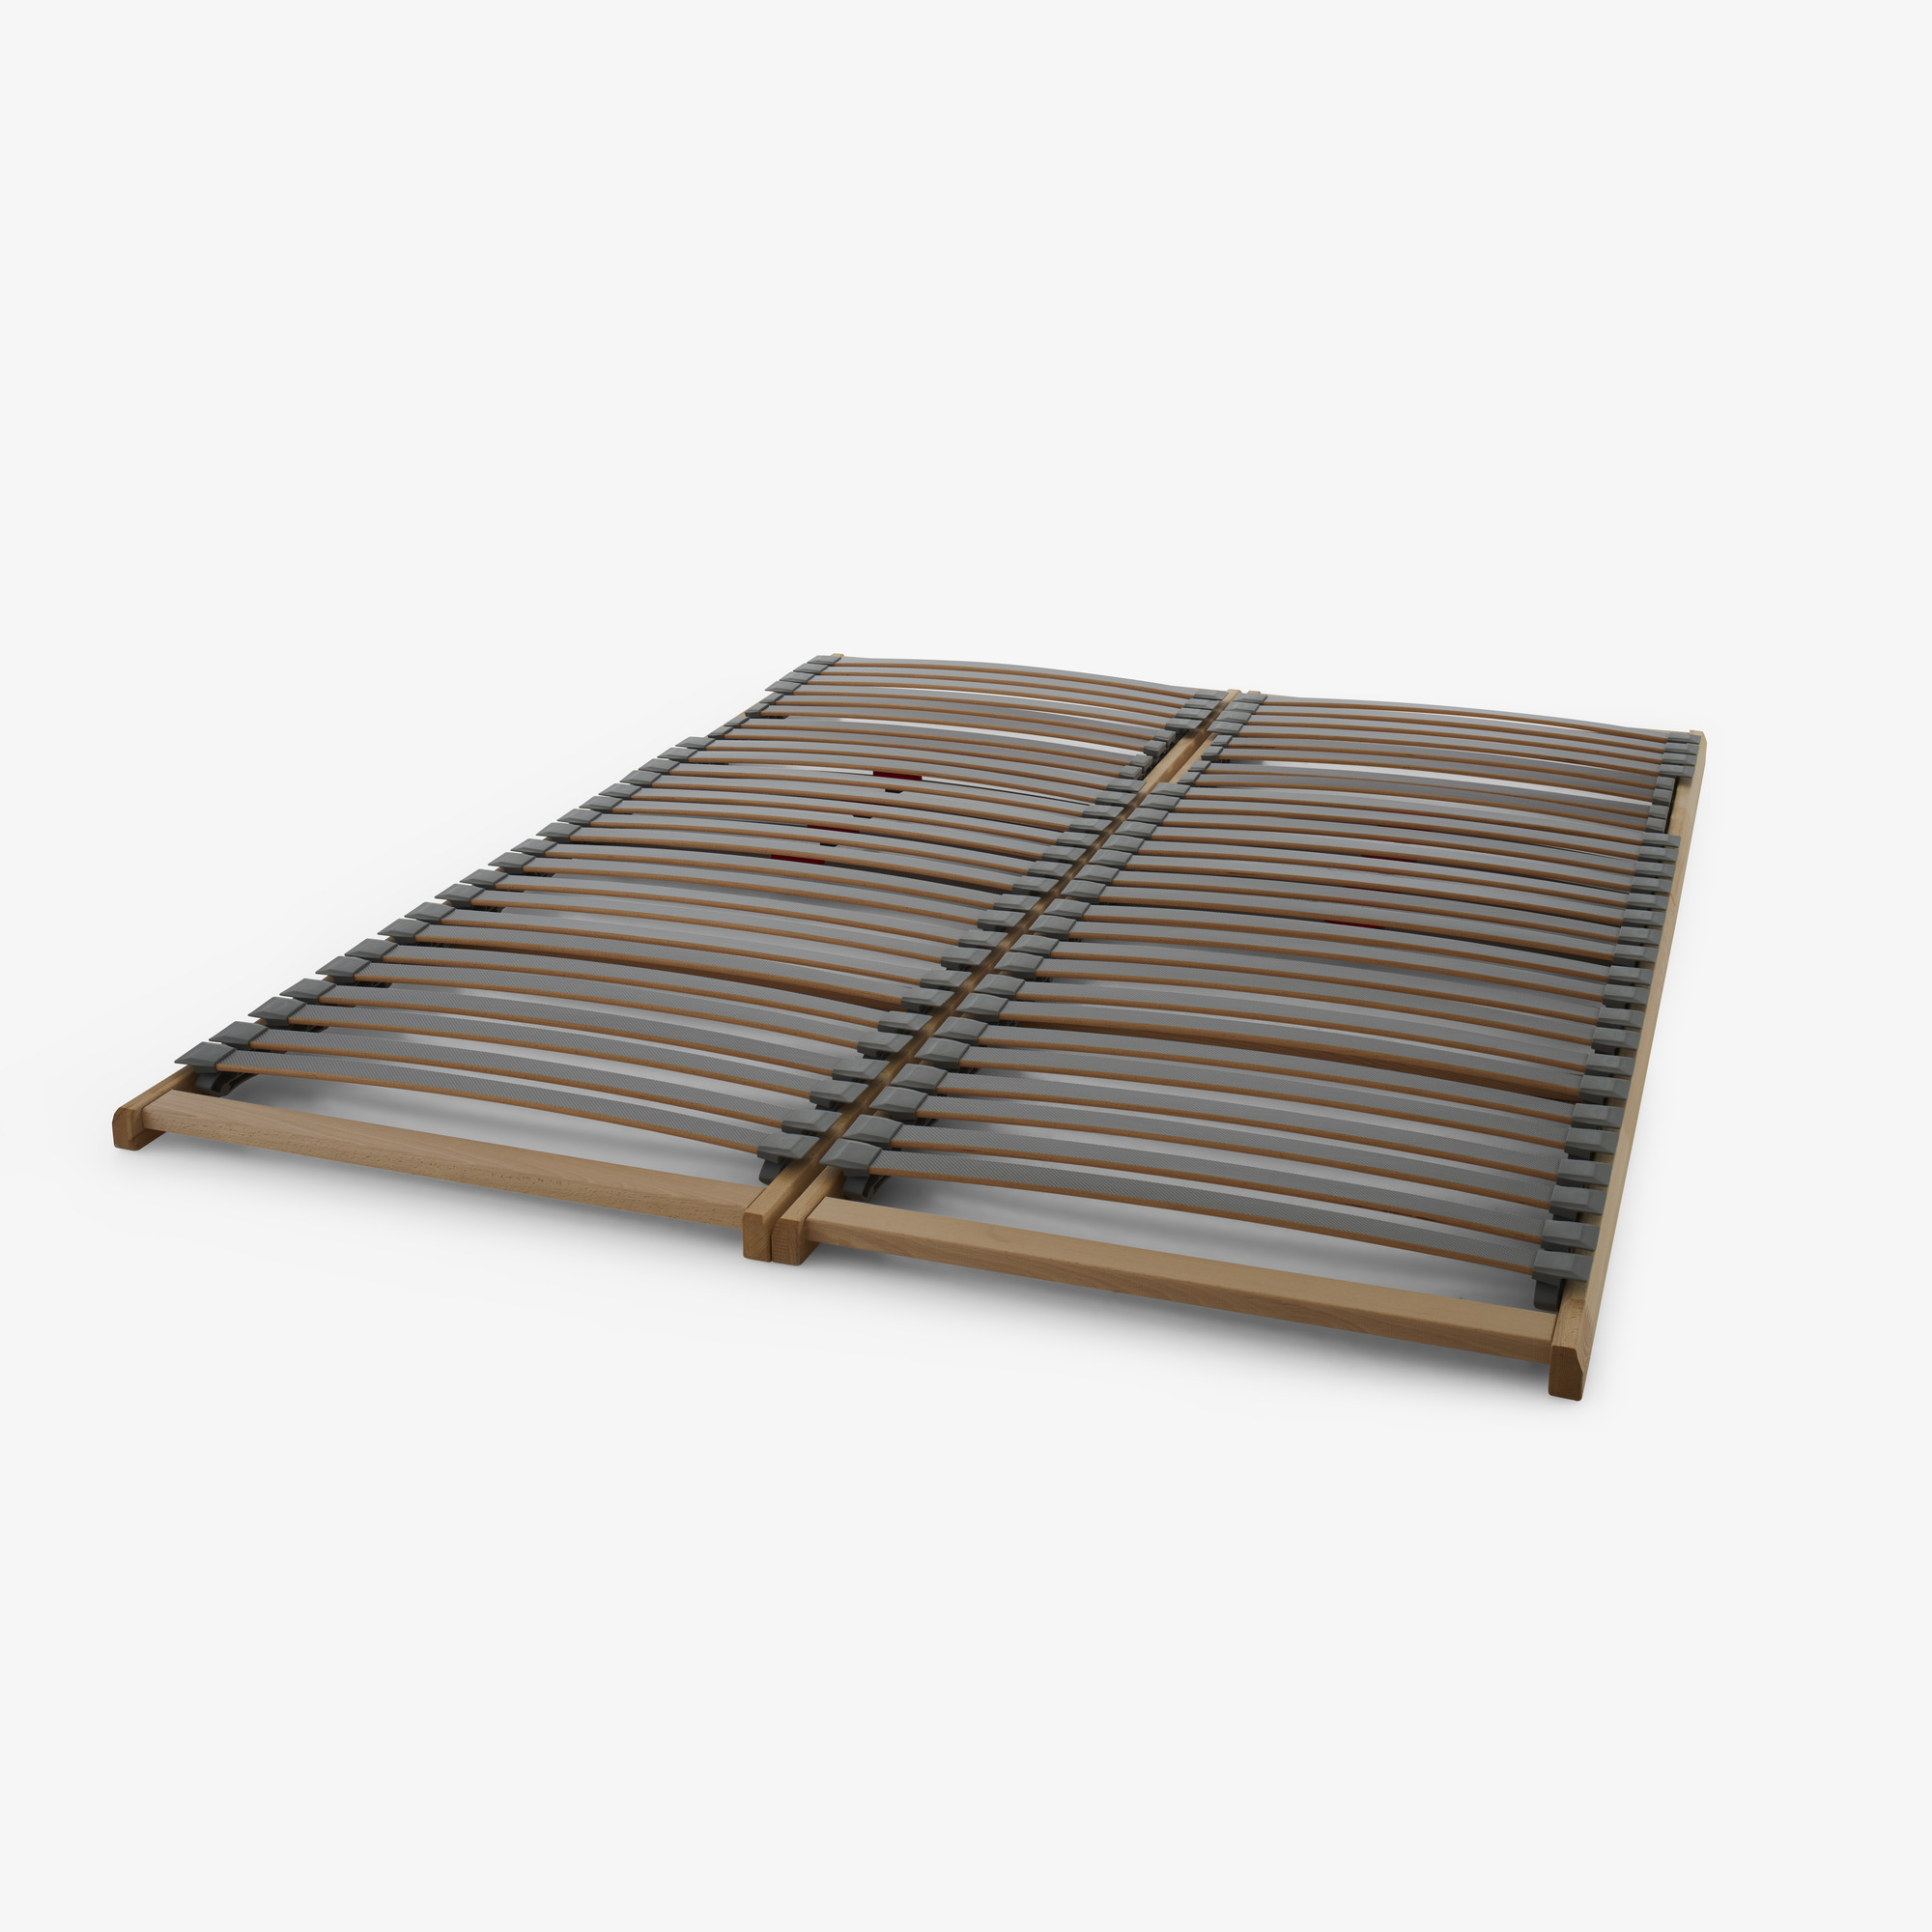 Image Slatted base - with double slats with articulated supports 2